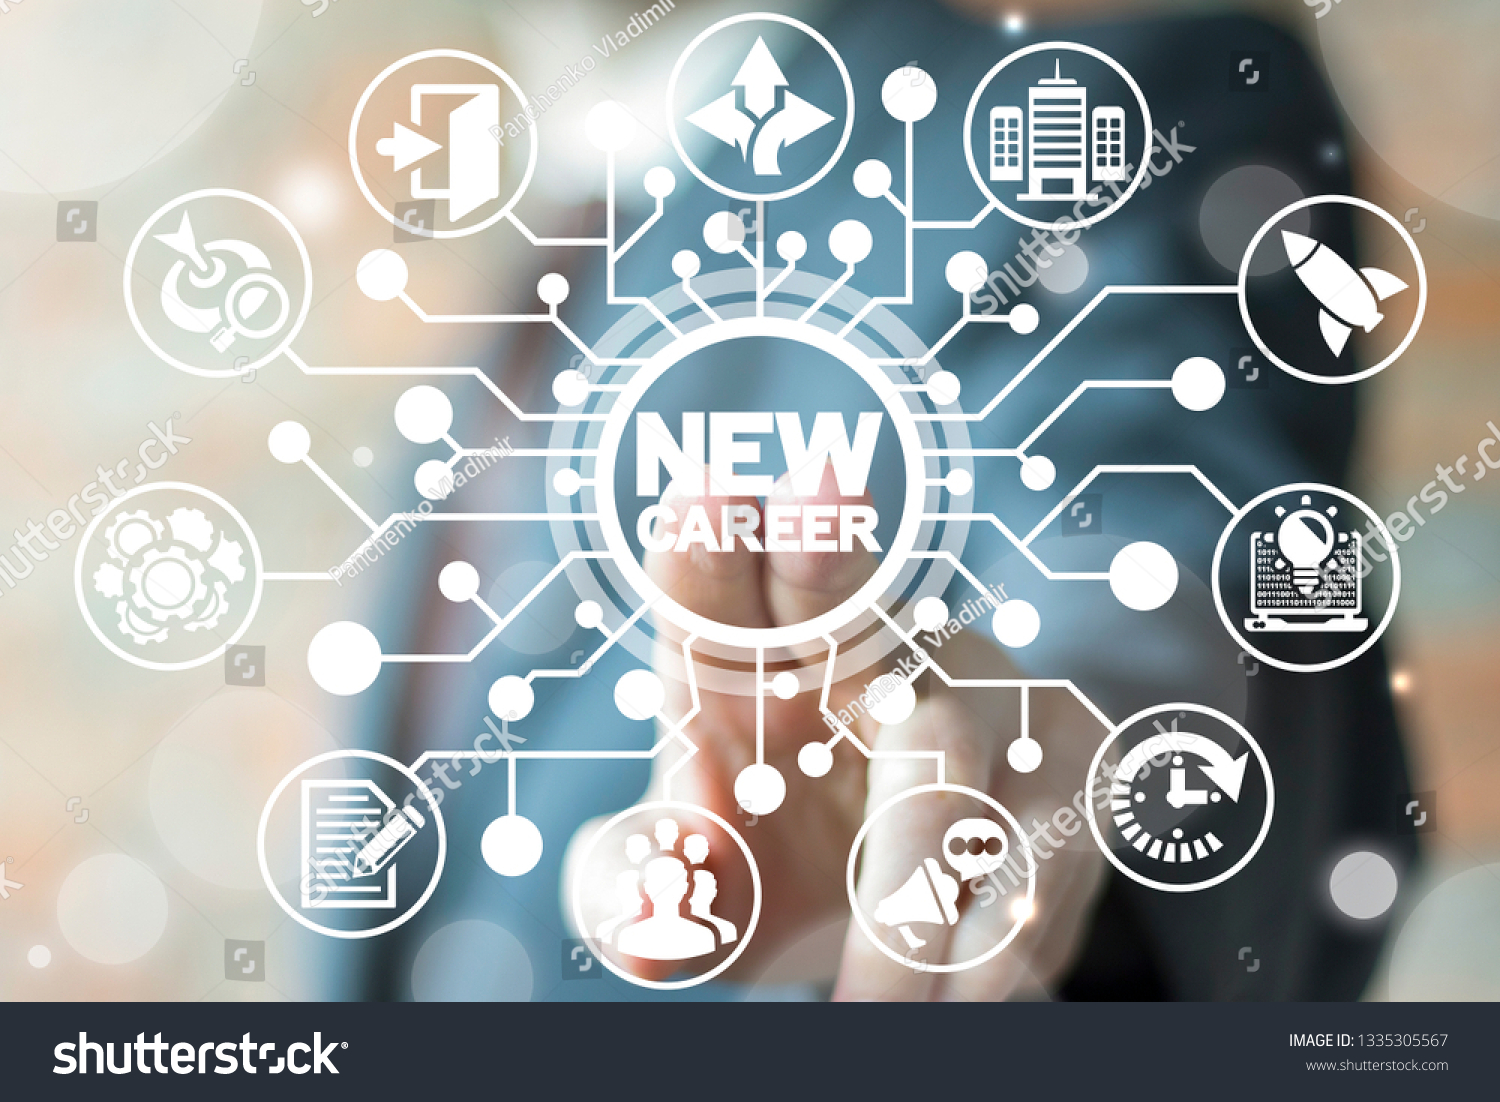 Man uses on a virtual screen of the future and touches the inscription: NEW CAREER. New career start begin business сoncept. Skills growth and motivation. #1335305567